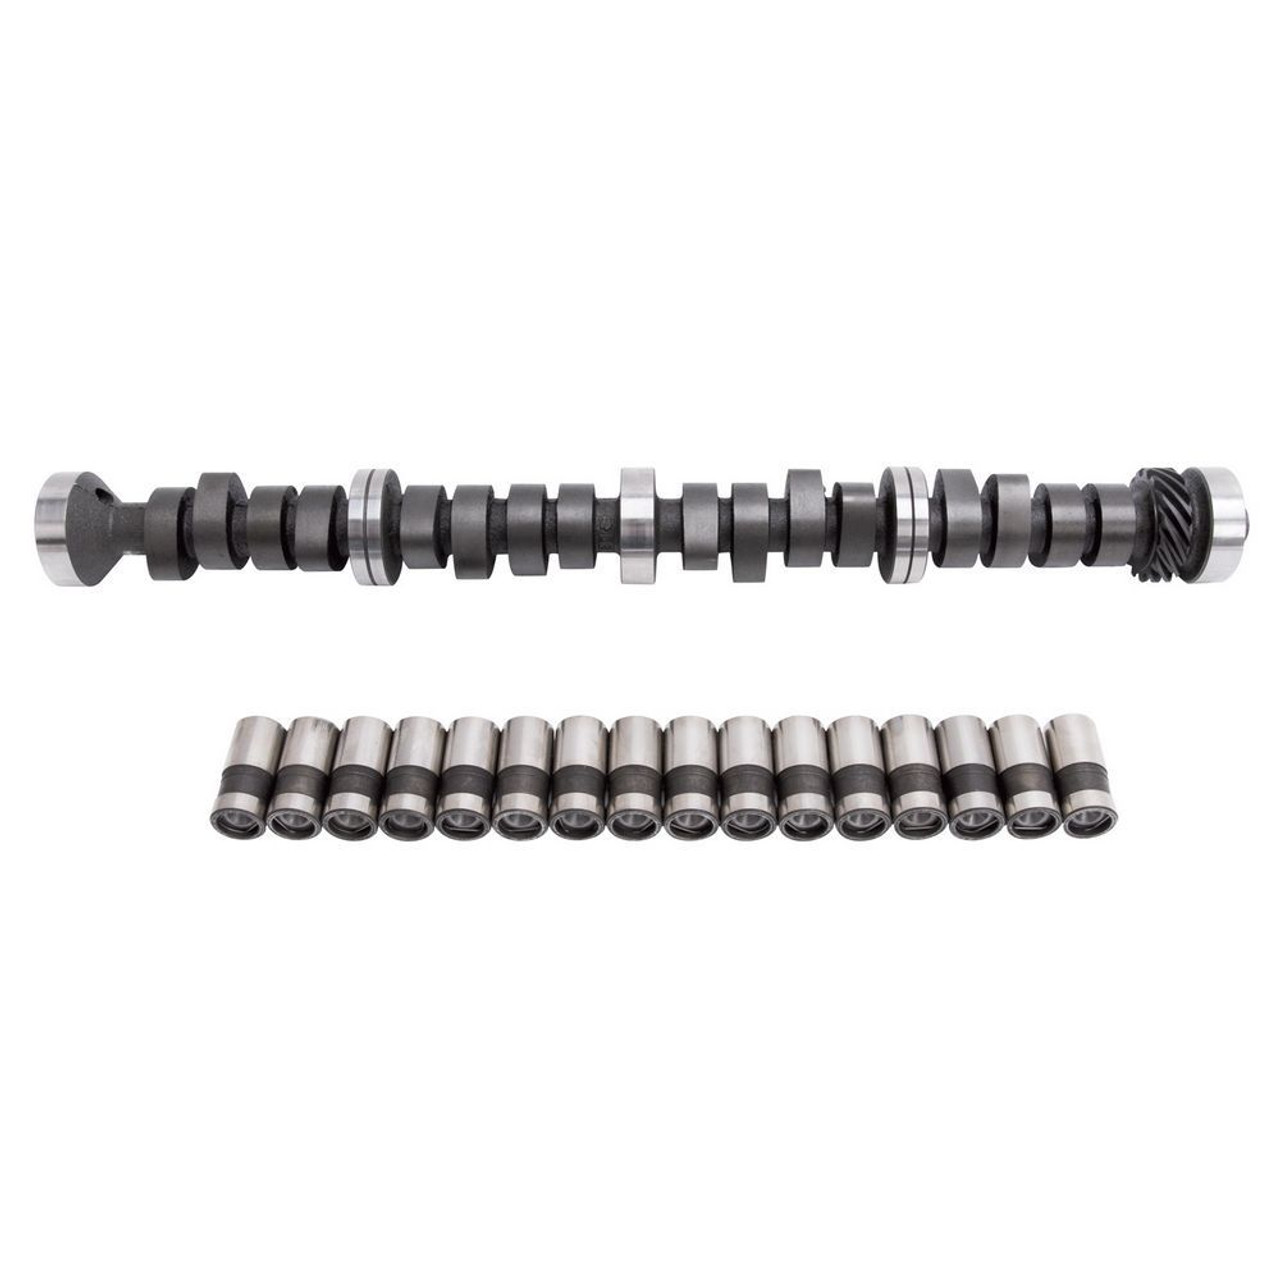 Edelbrock Perf RPM Cam Lifters Kit Ford 429-460 - 7167